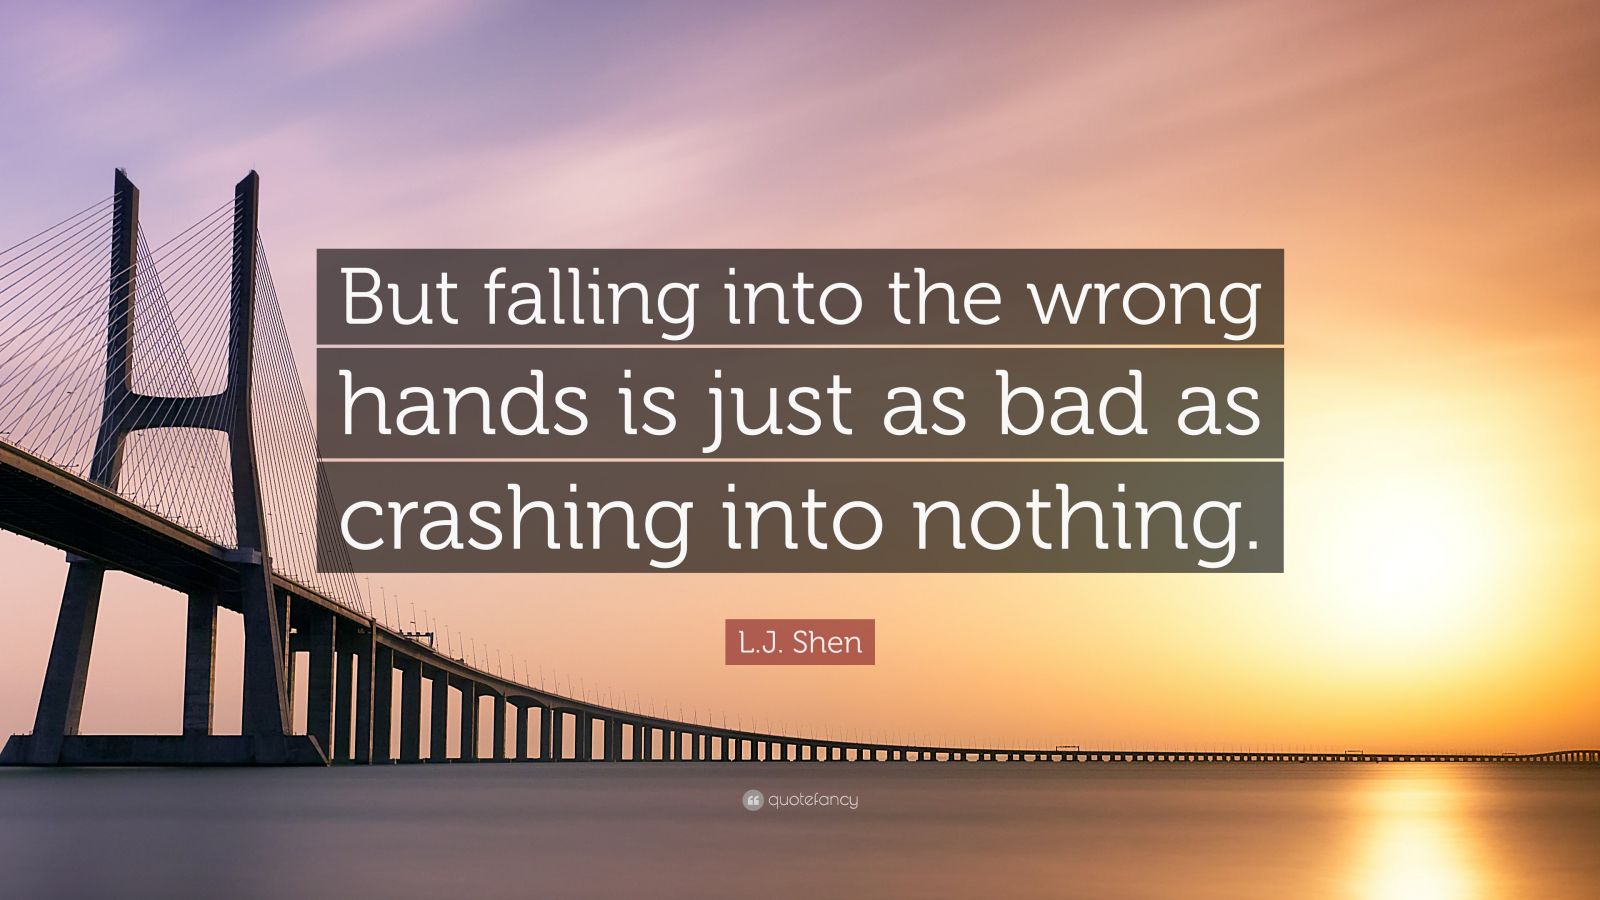 L.J. Shen Quote: into the hands is as bad as crashing into nothing.”